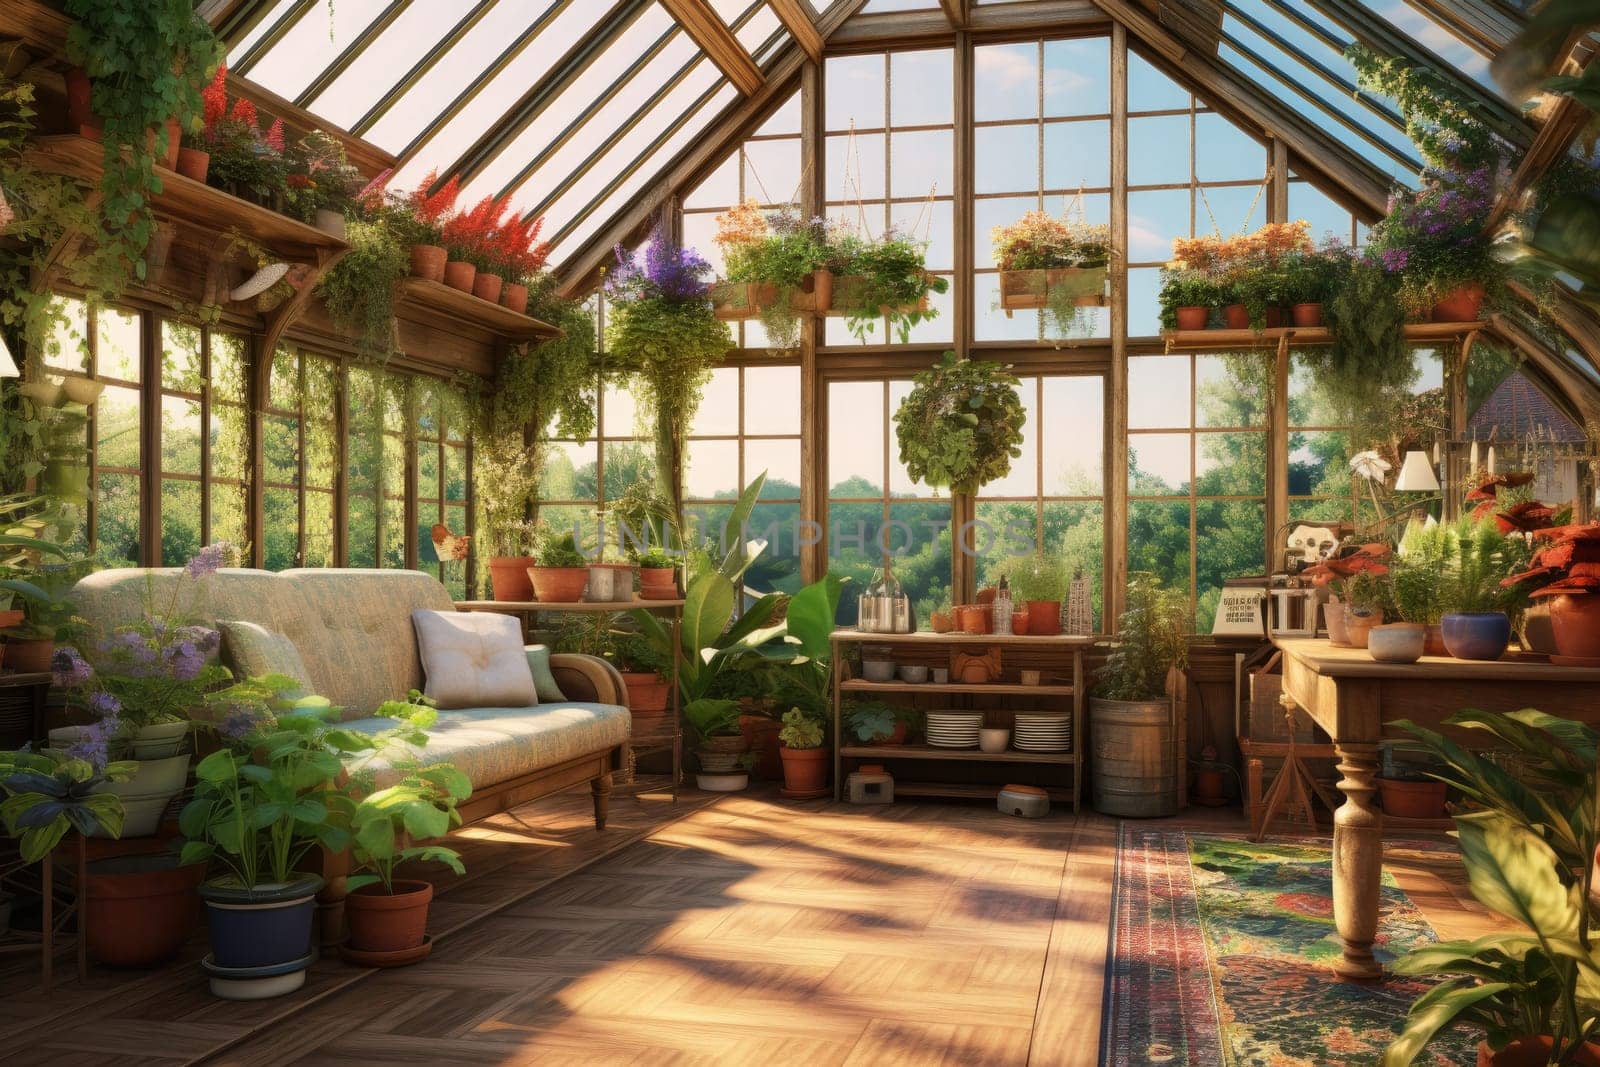 A perfectly maintained greenhouse with rows of diverse plant species flourishing in an environment filled with natural light and ideal growing conditions.